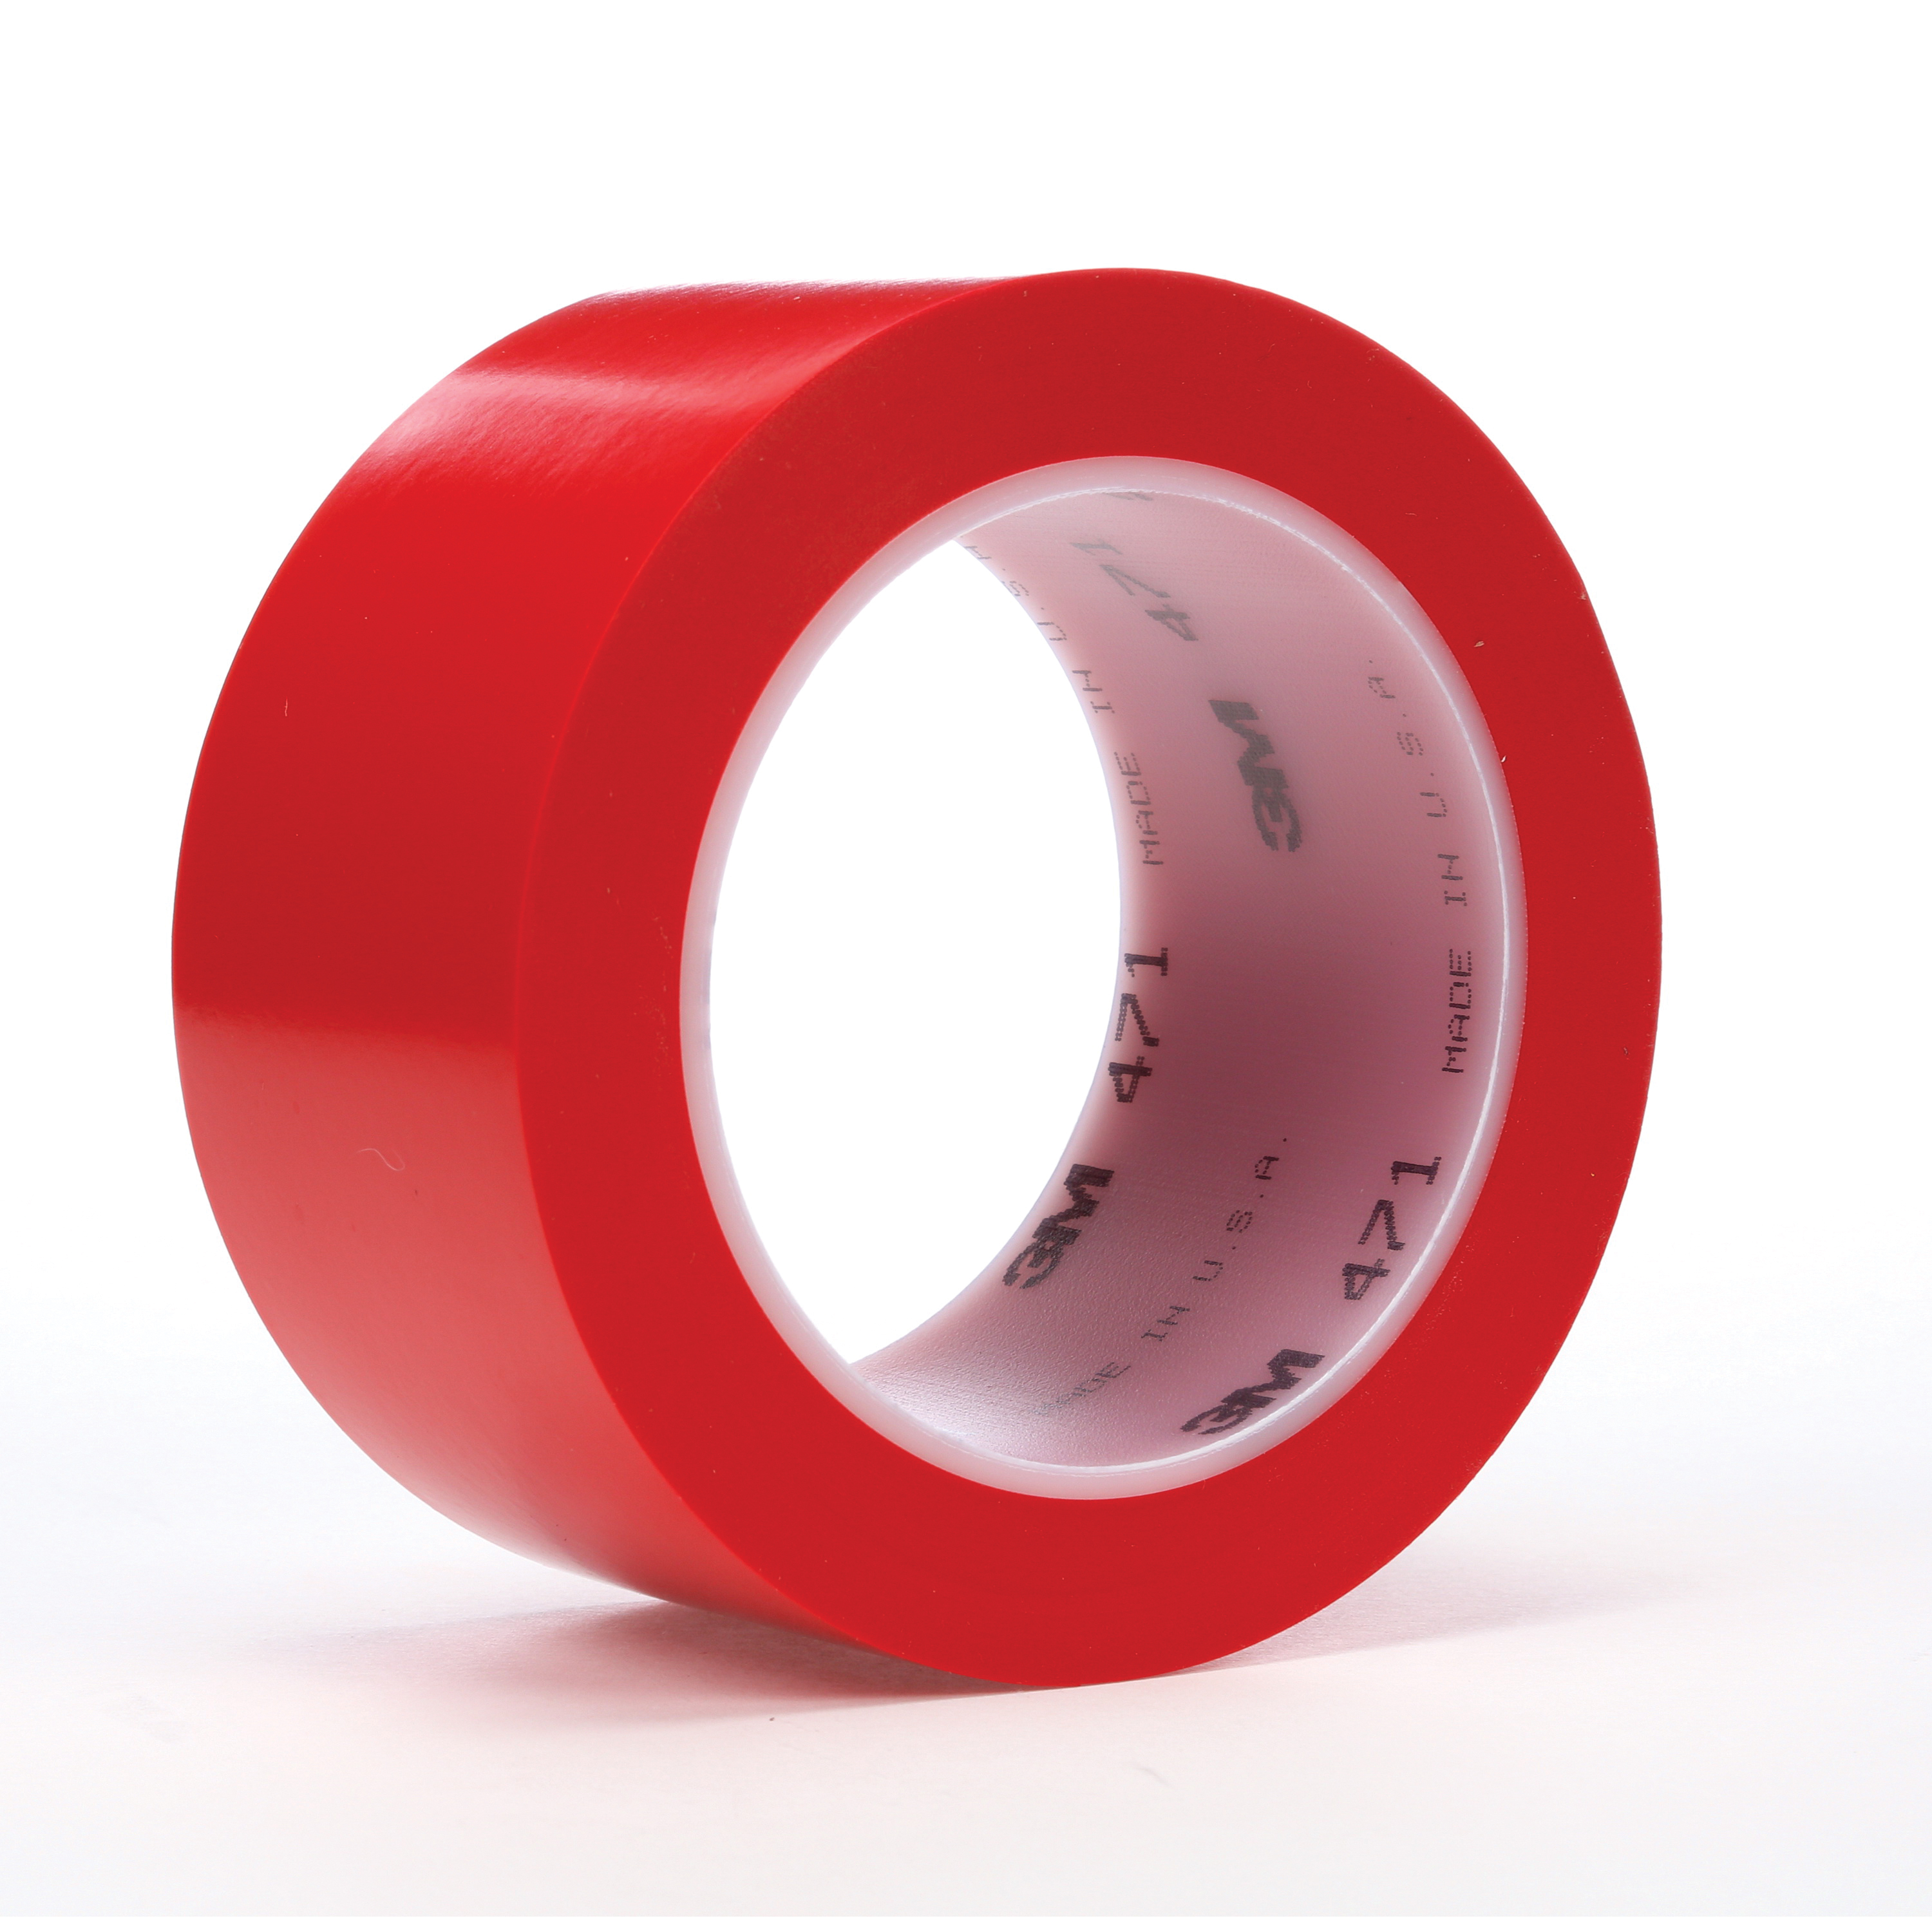 3M™ 021200-03110 High Performance Vinyl Tape, 36 yd L x 4 in W, 5.2 mil THK, Rubber Adhesive, Vinyl Backing, Red